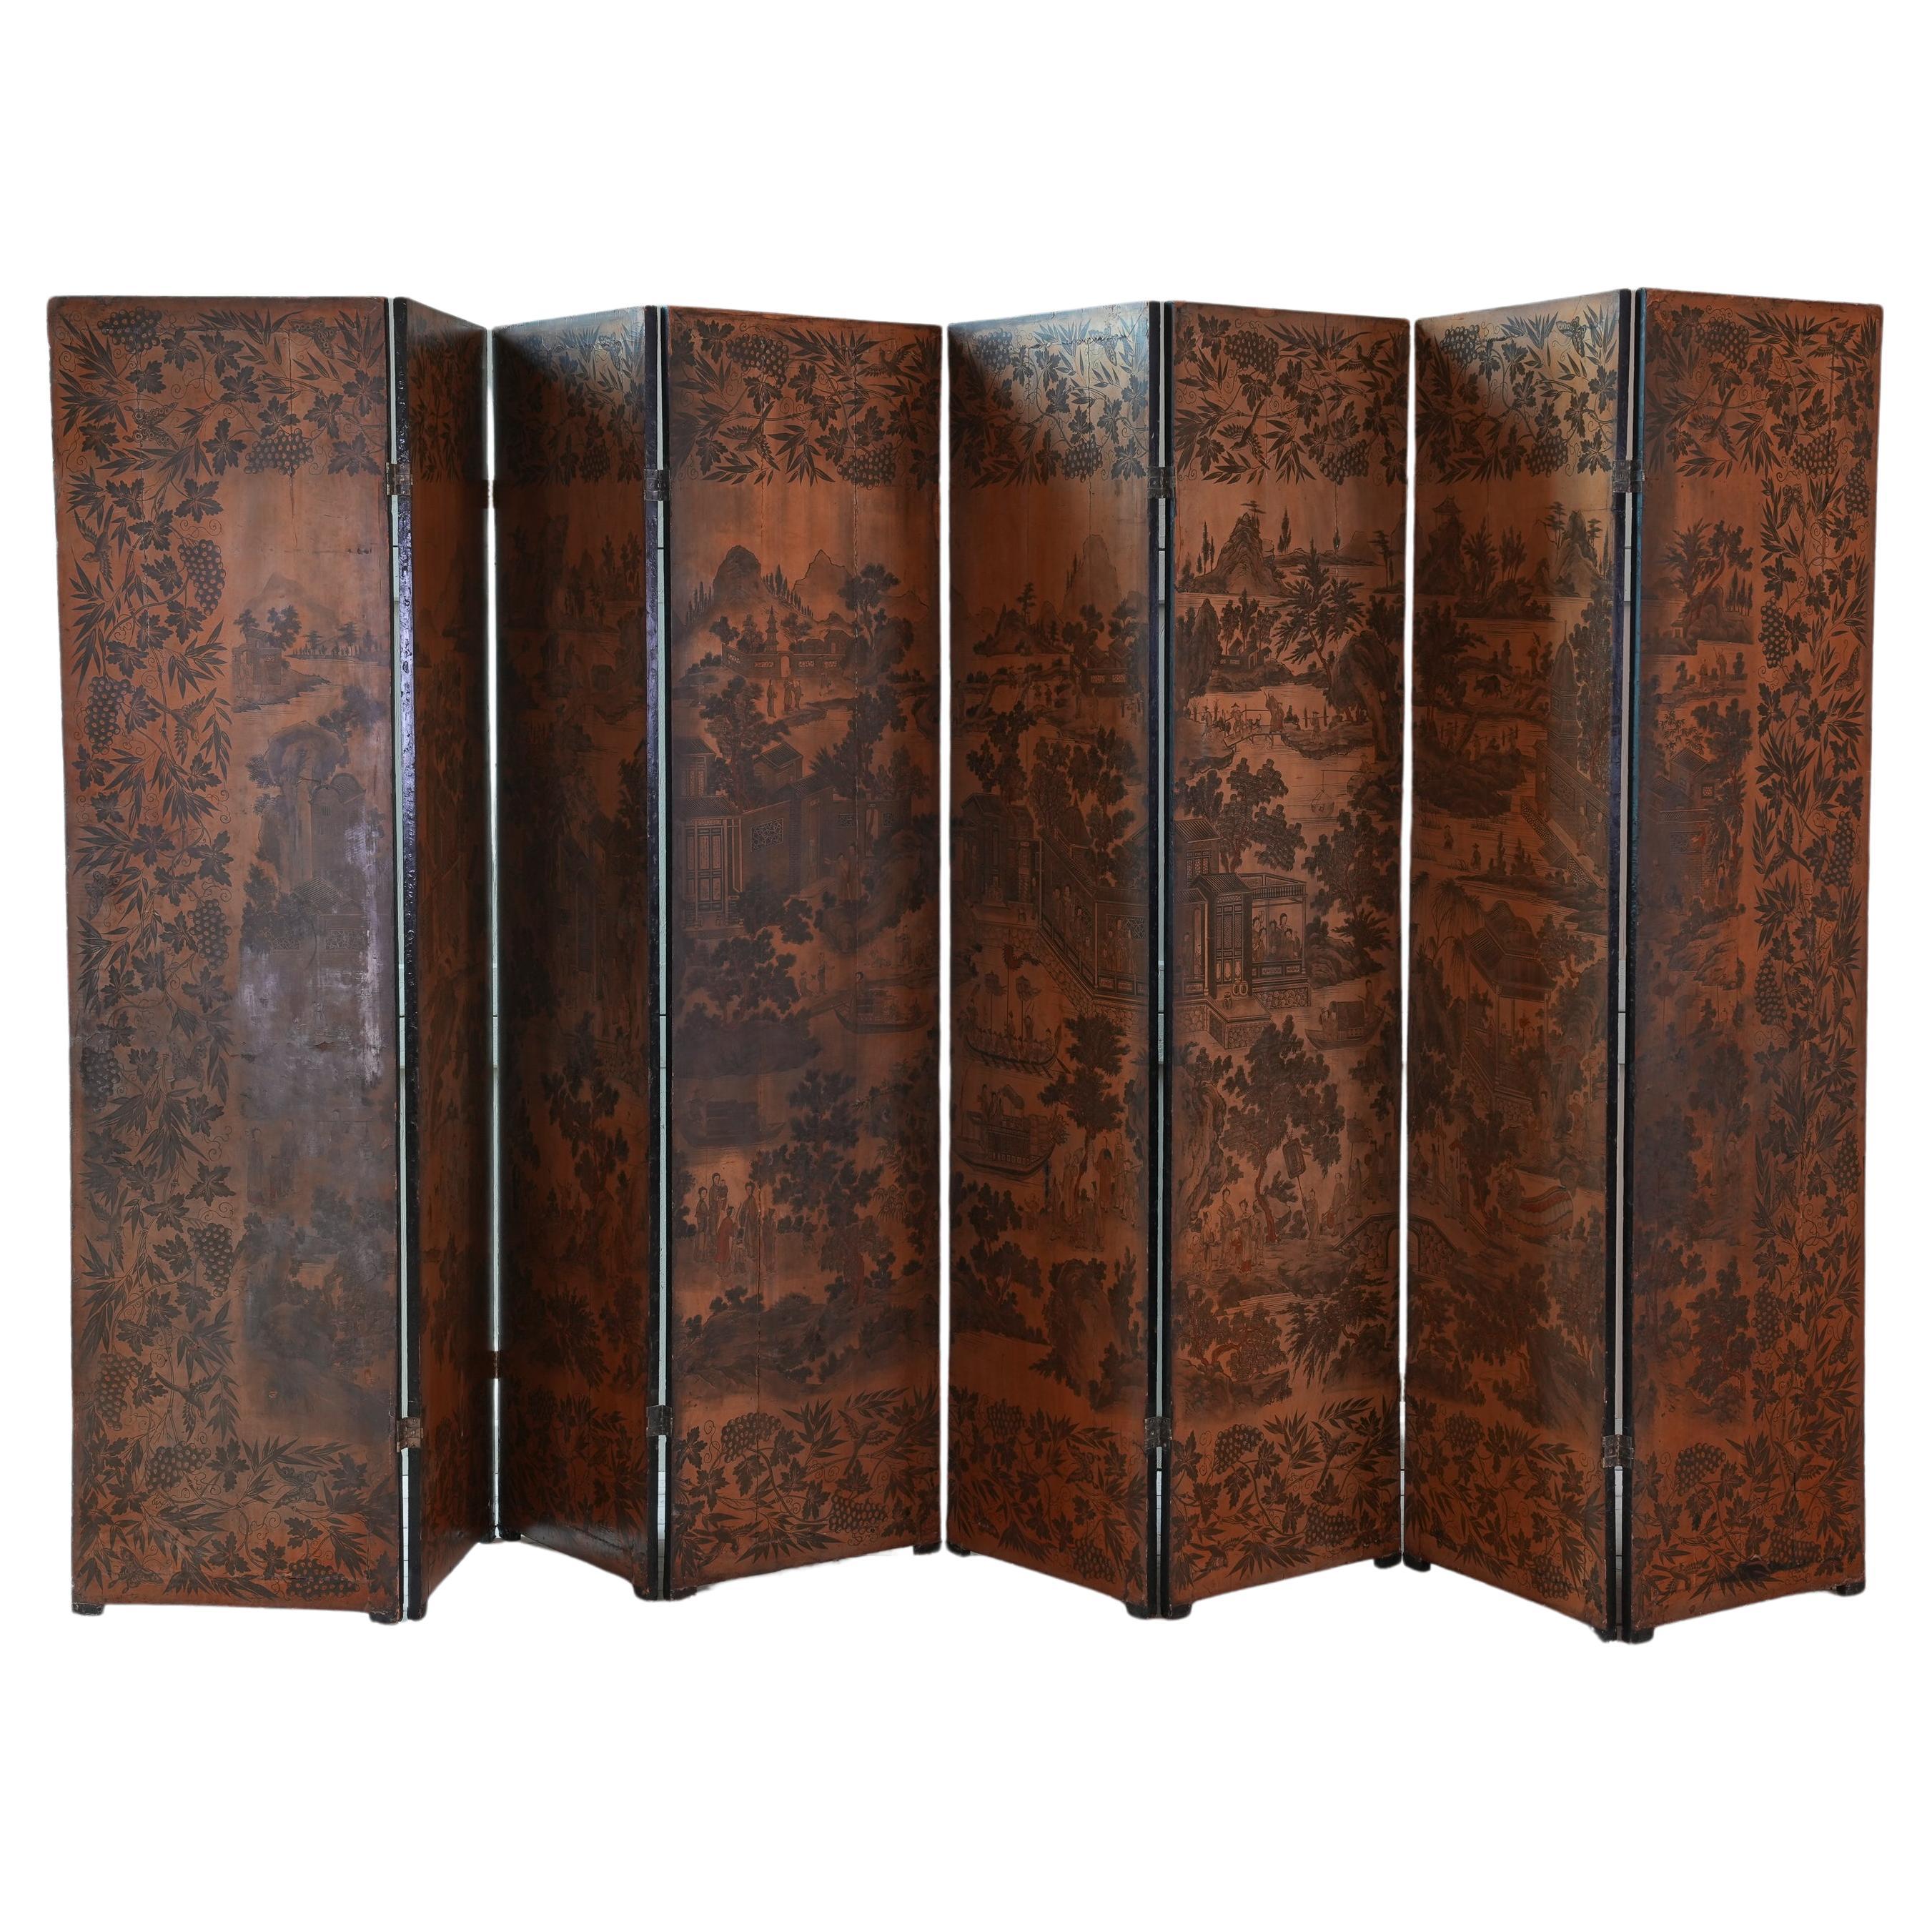 Early 19th Century Chinese Export Eight-Fold Lacquer Screen For Sale